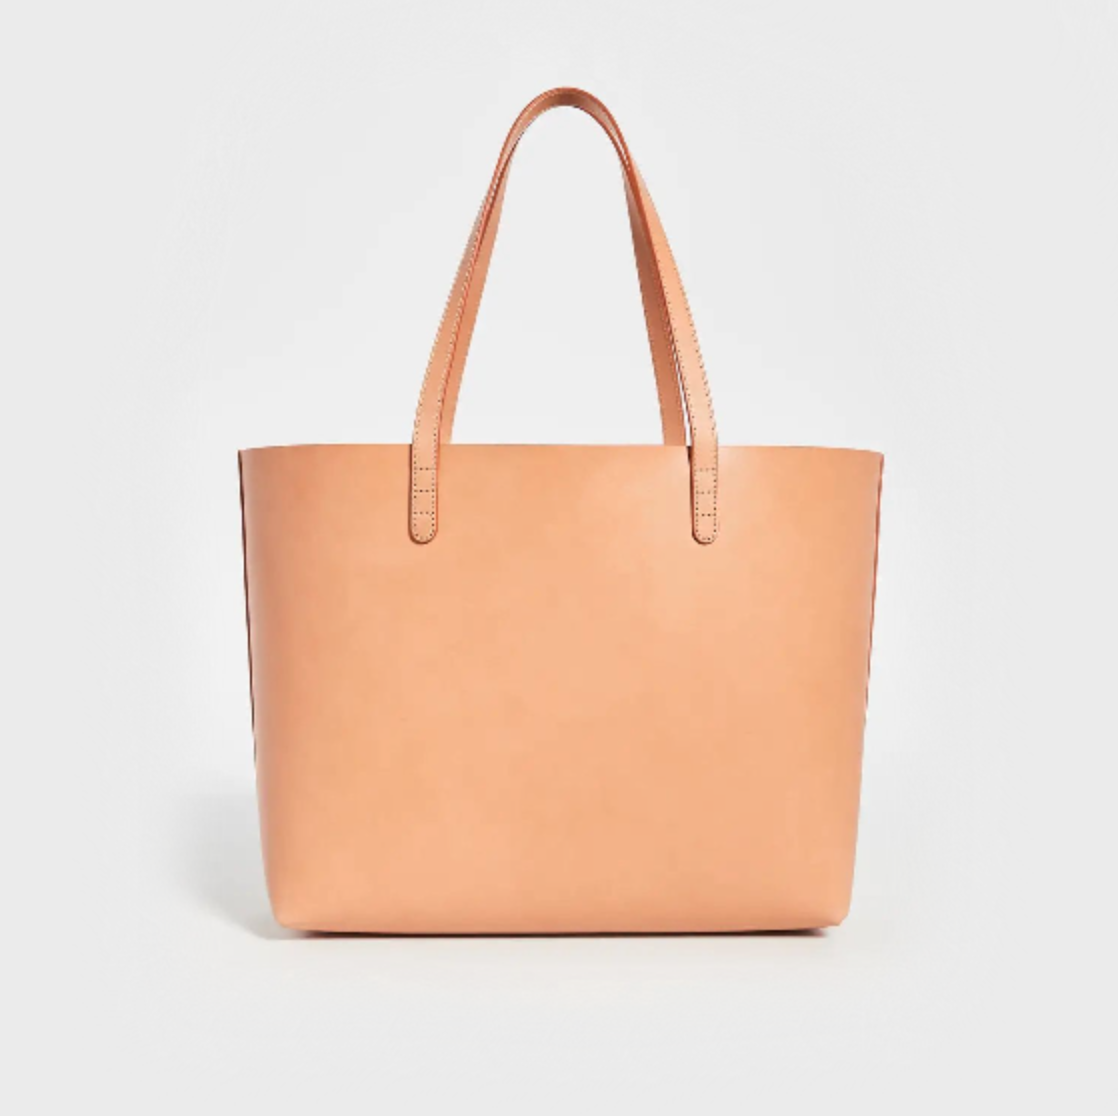 20 Designer Bags That Can Carry Your Laptop